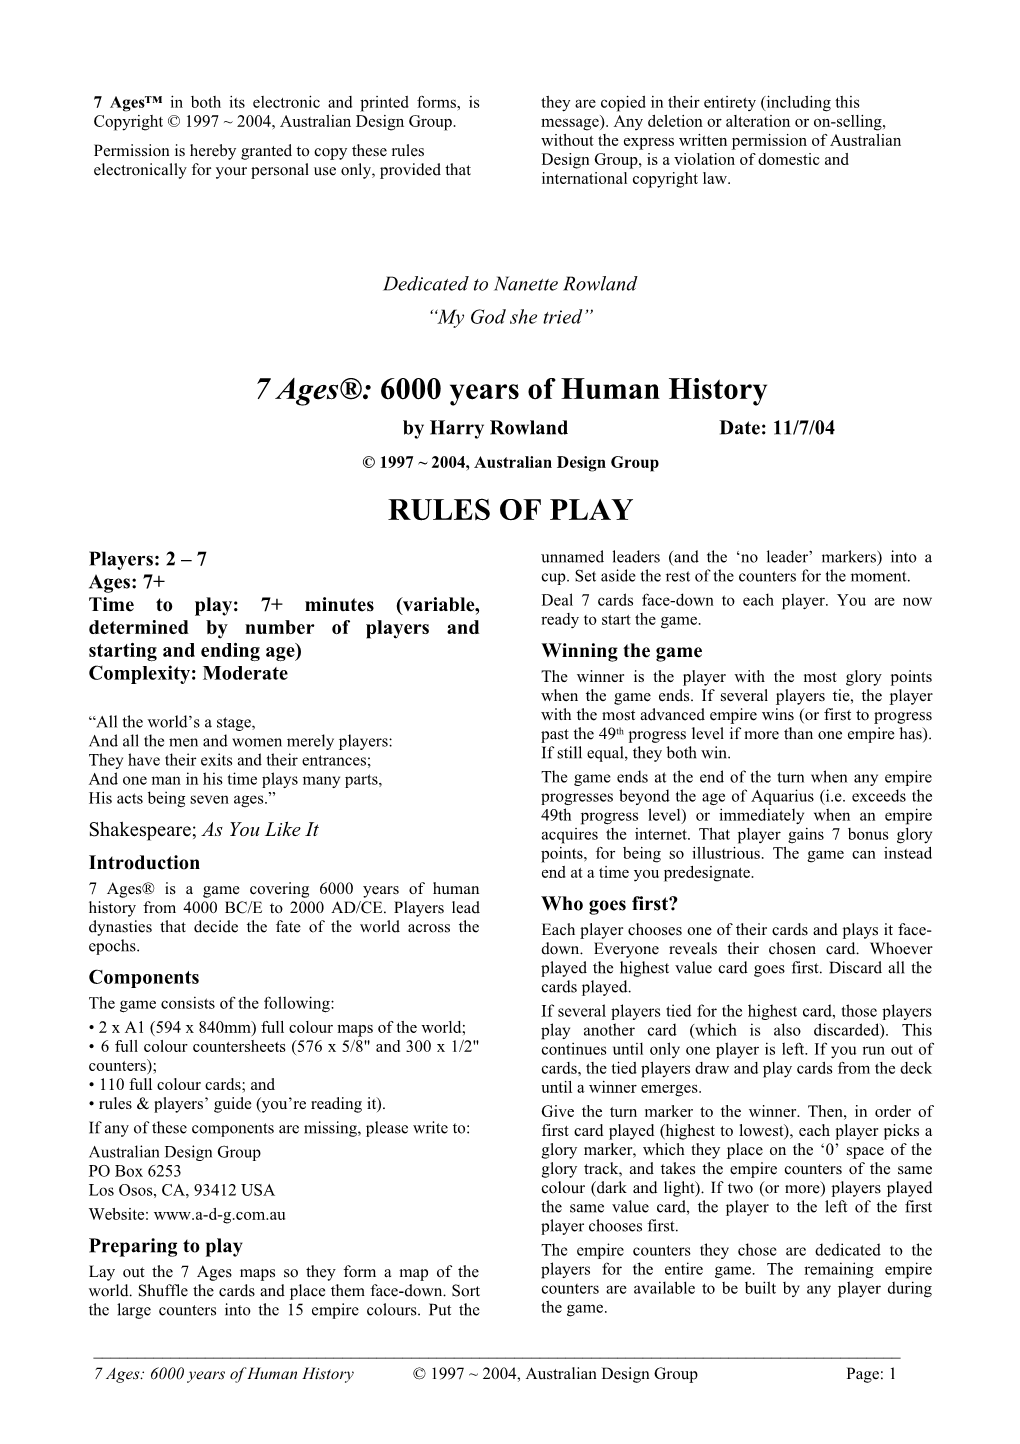 7 Ages: 6000 Years of Human History 1997 2004, Australian Design Group Page: 1